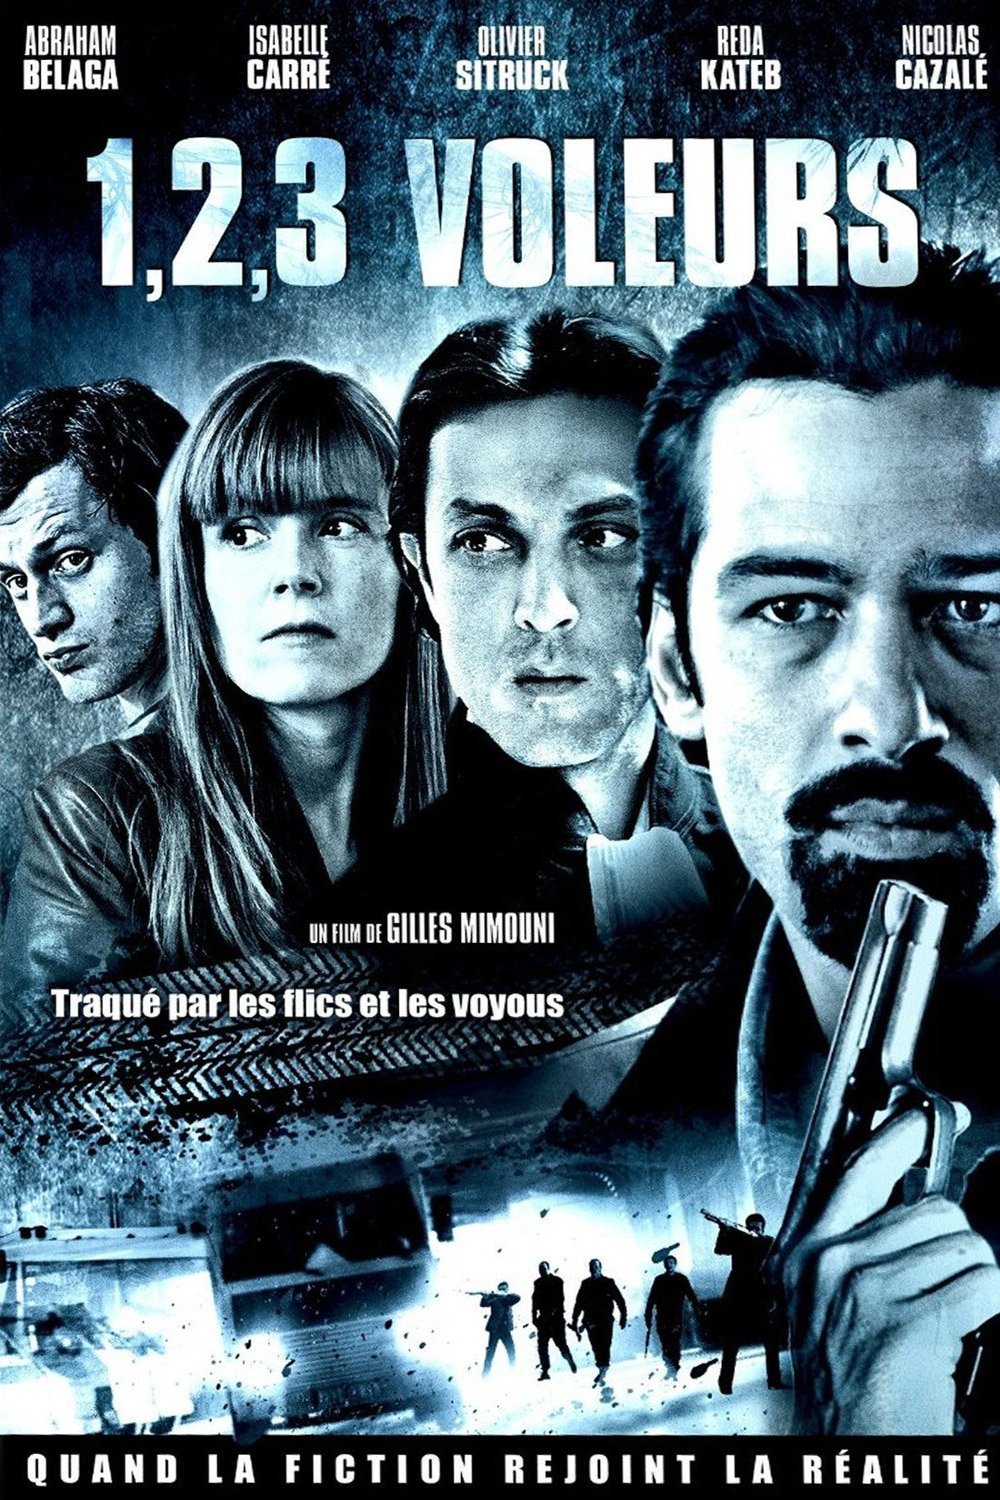 Poster of the movie 1, 2, 3, voleurs